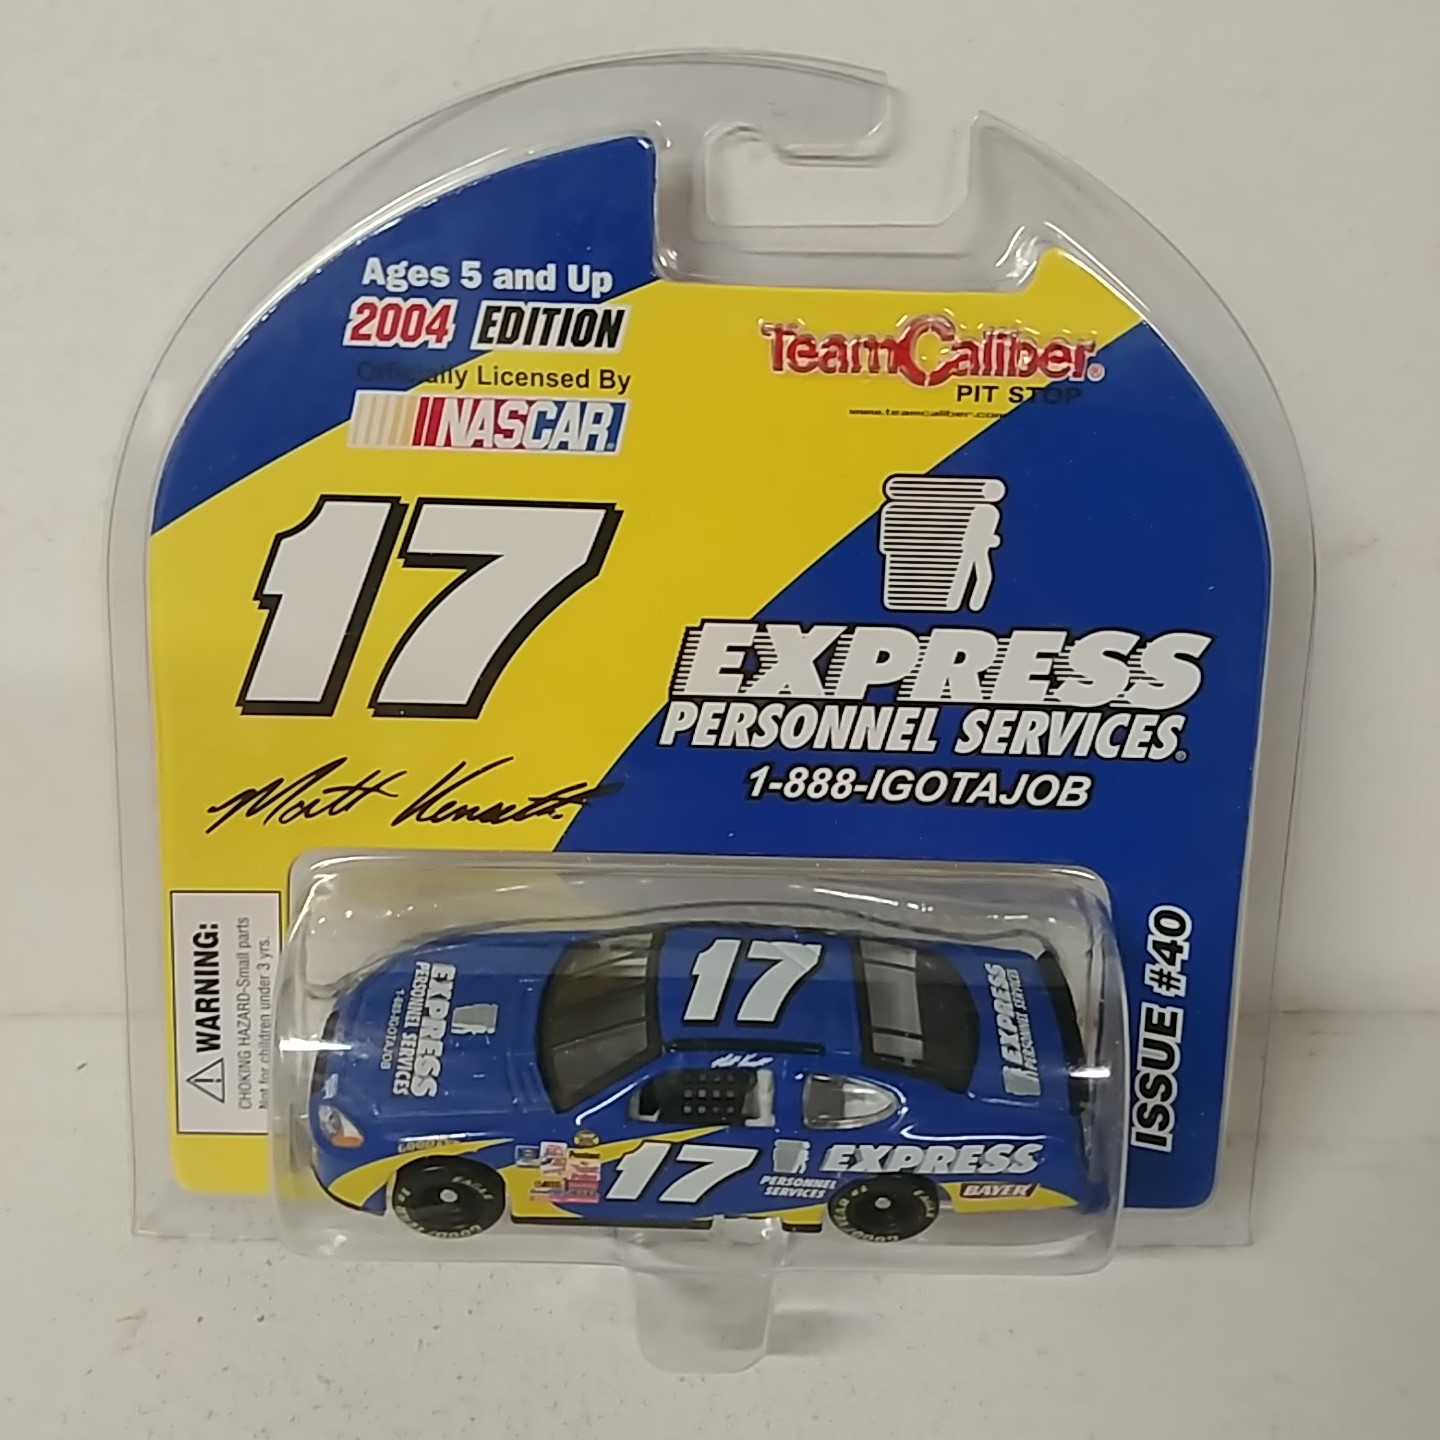 2004 Matt Kenseth 1/64th Express Personnel Services Pitstop Series car